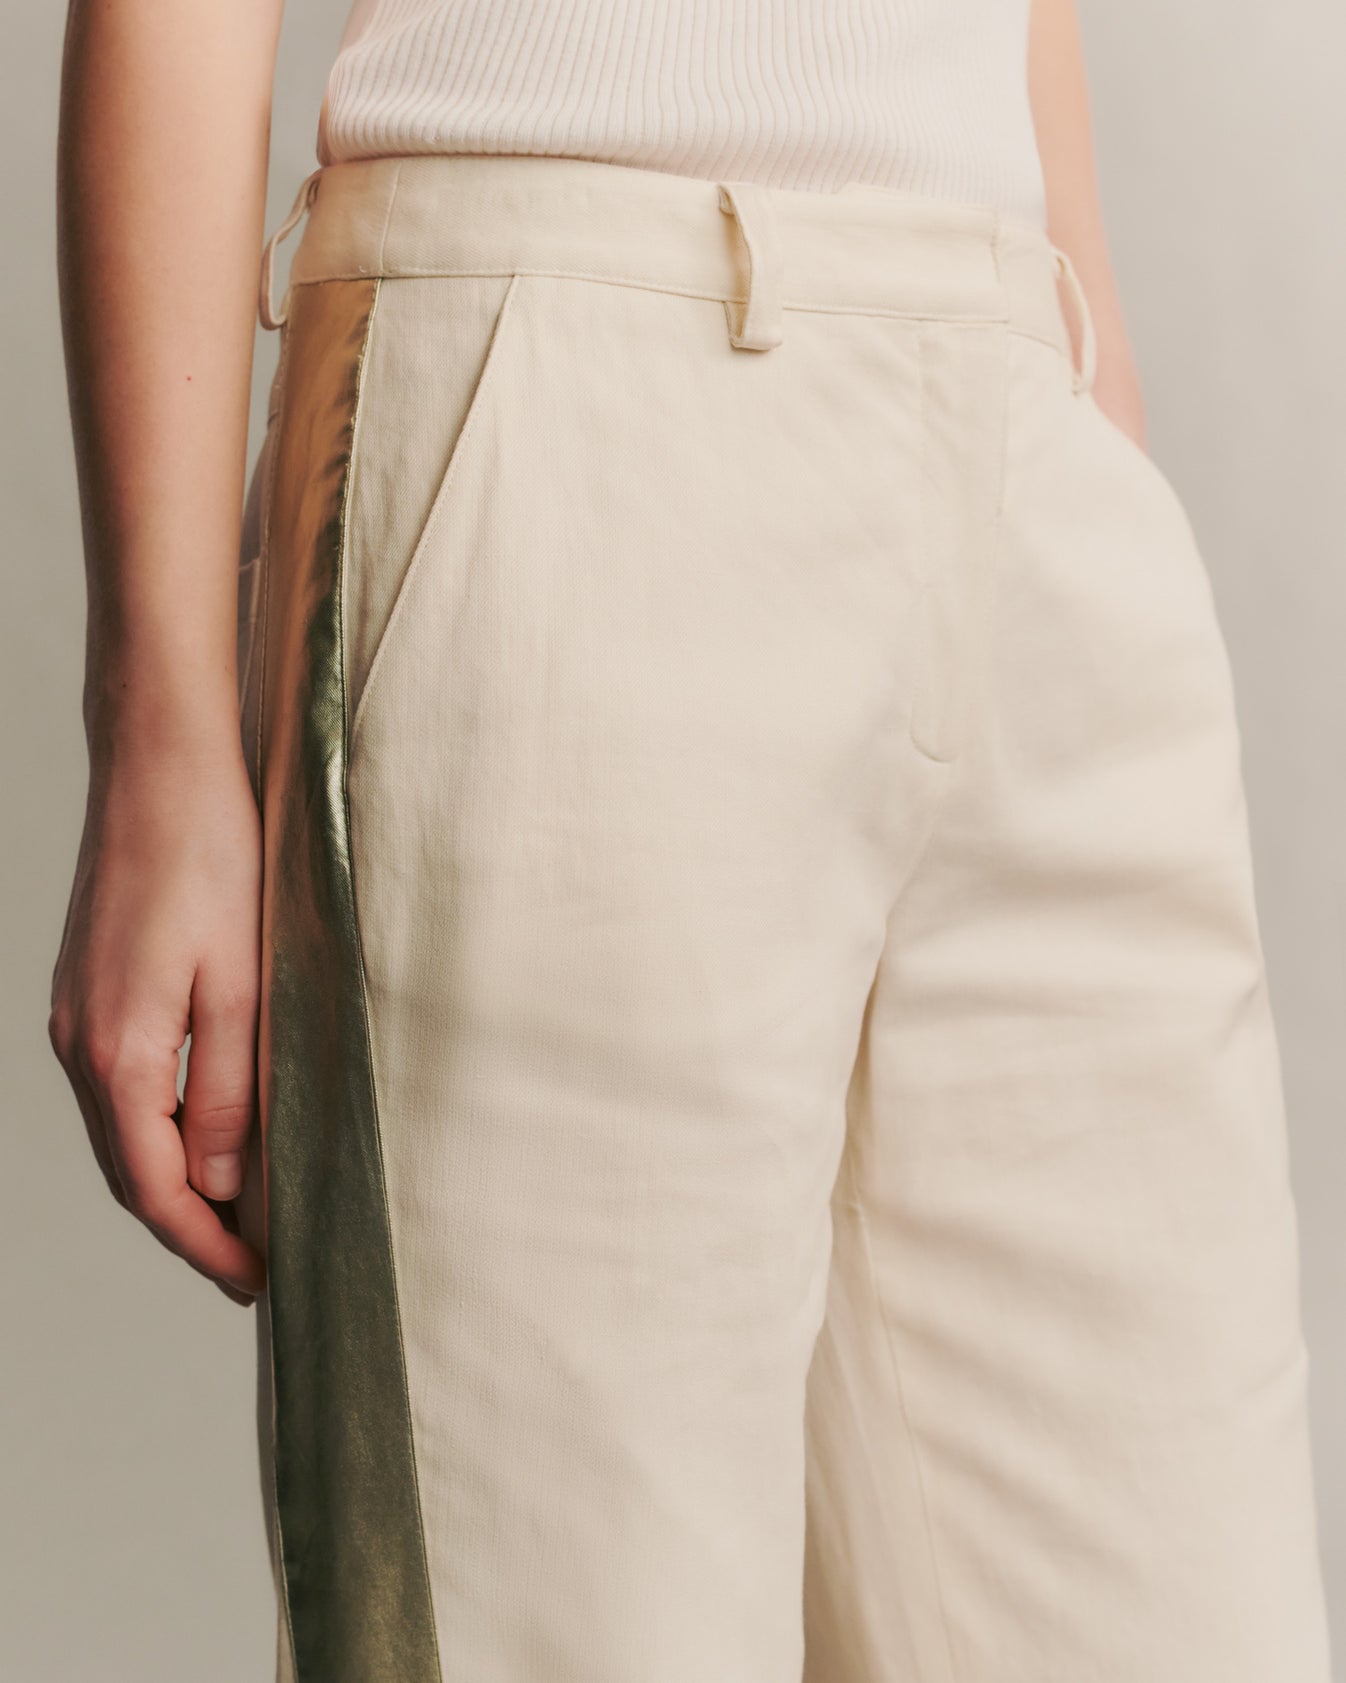 TWP Bone/light gold Stay Golden Pant in Cotton Linen view 6